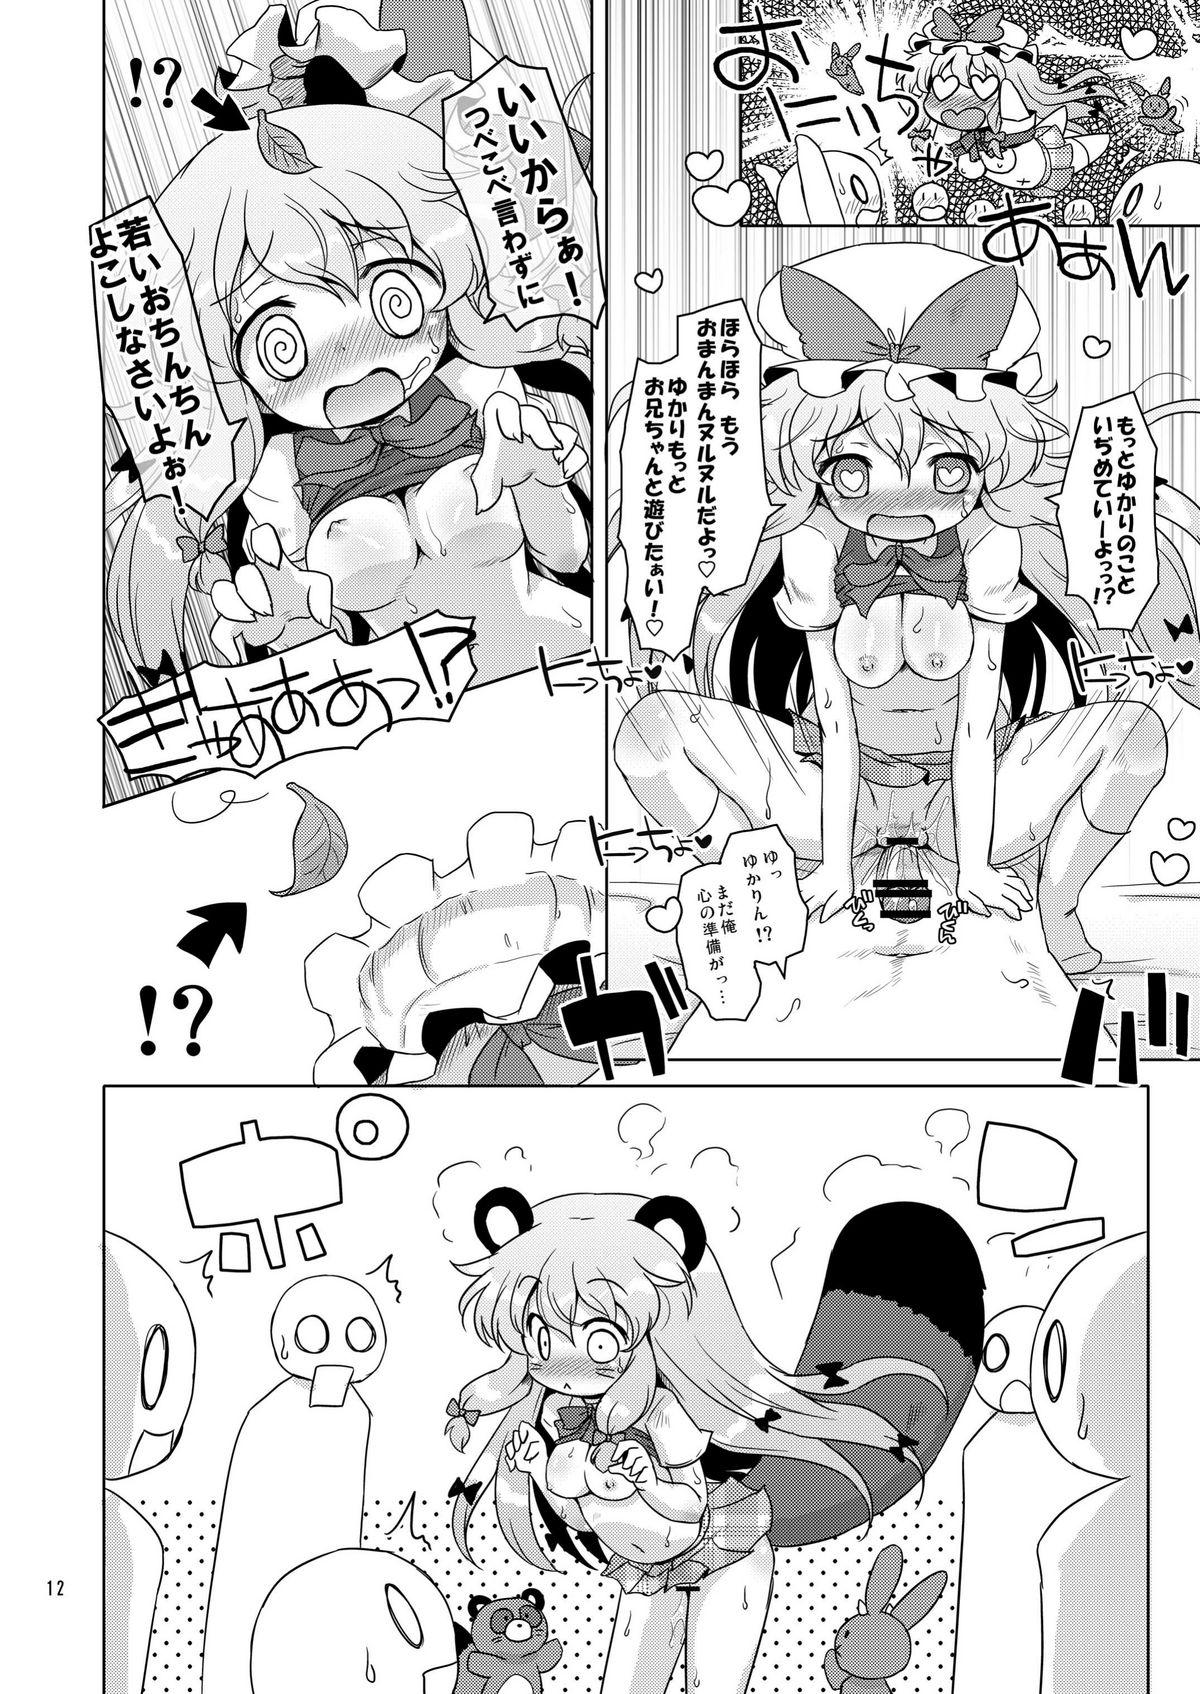 Pasivo Love Me! Fancy Baby Doll - Touhou project Tiny - Page 12